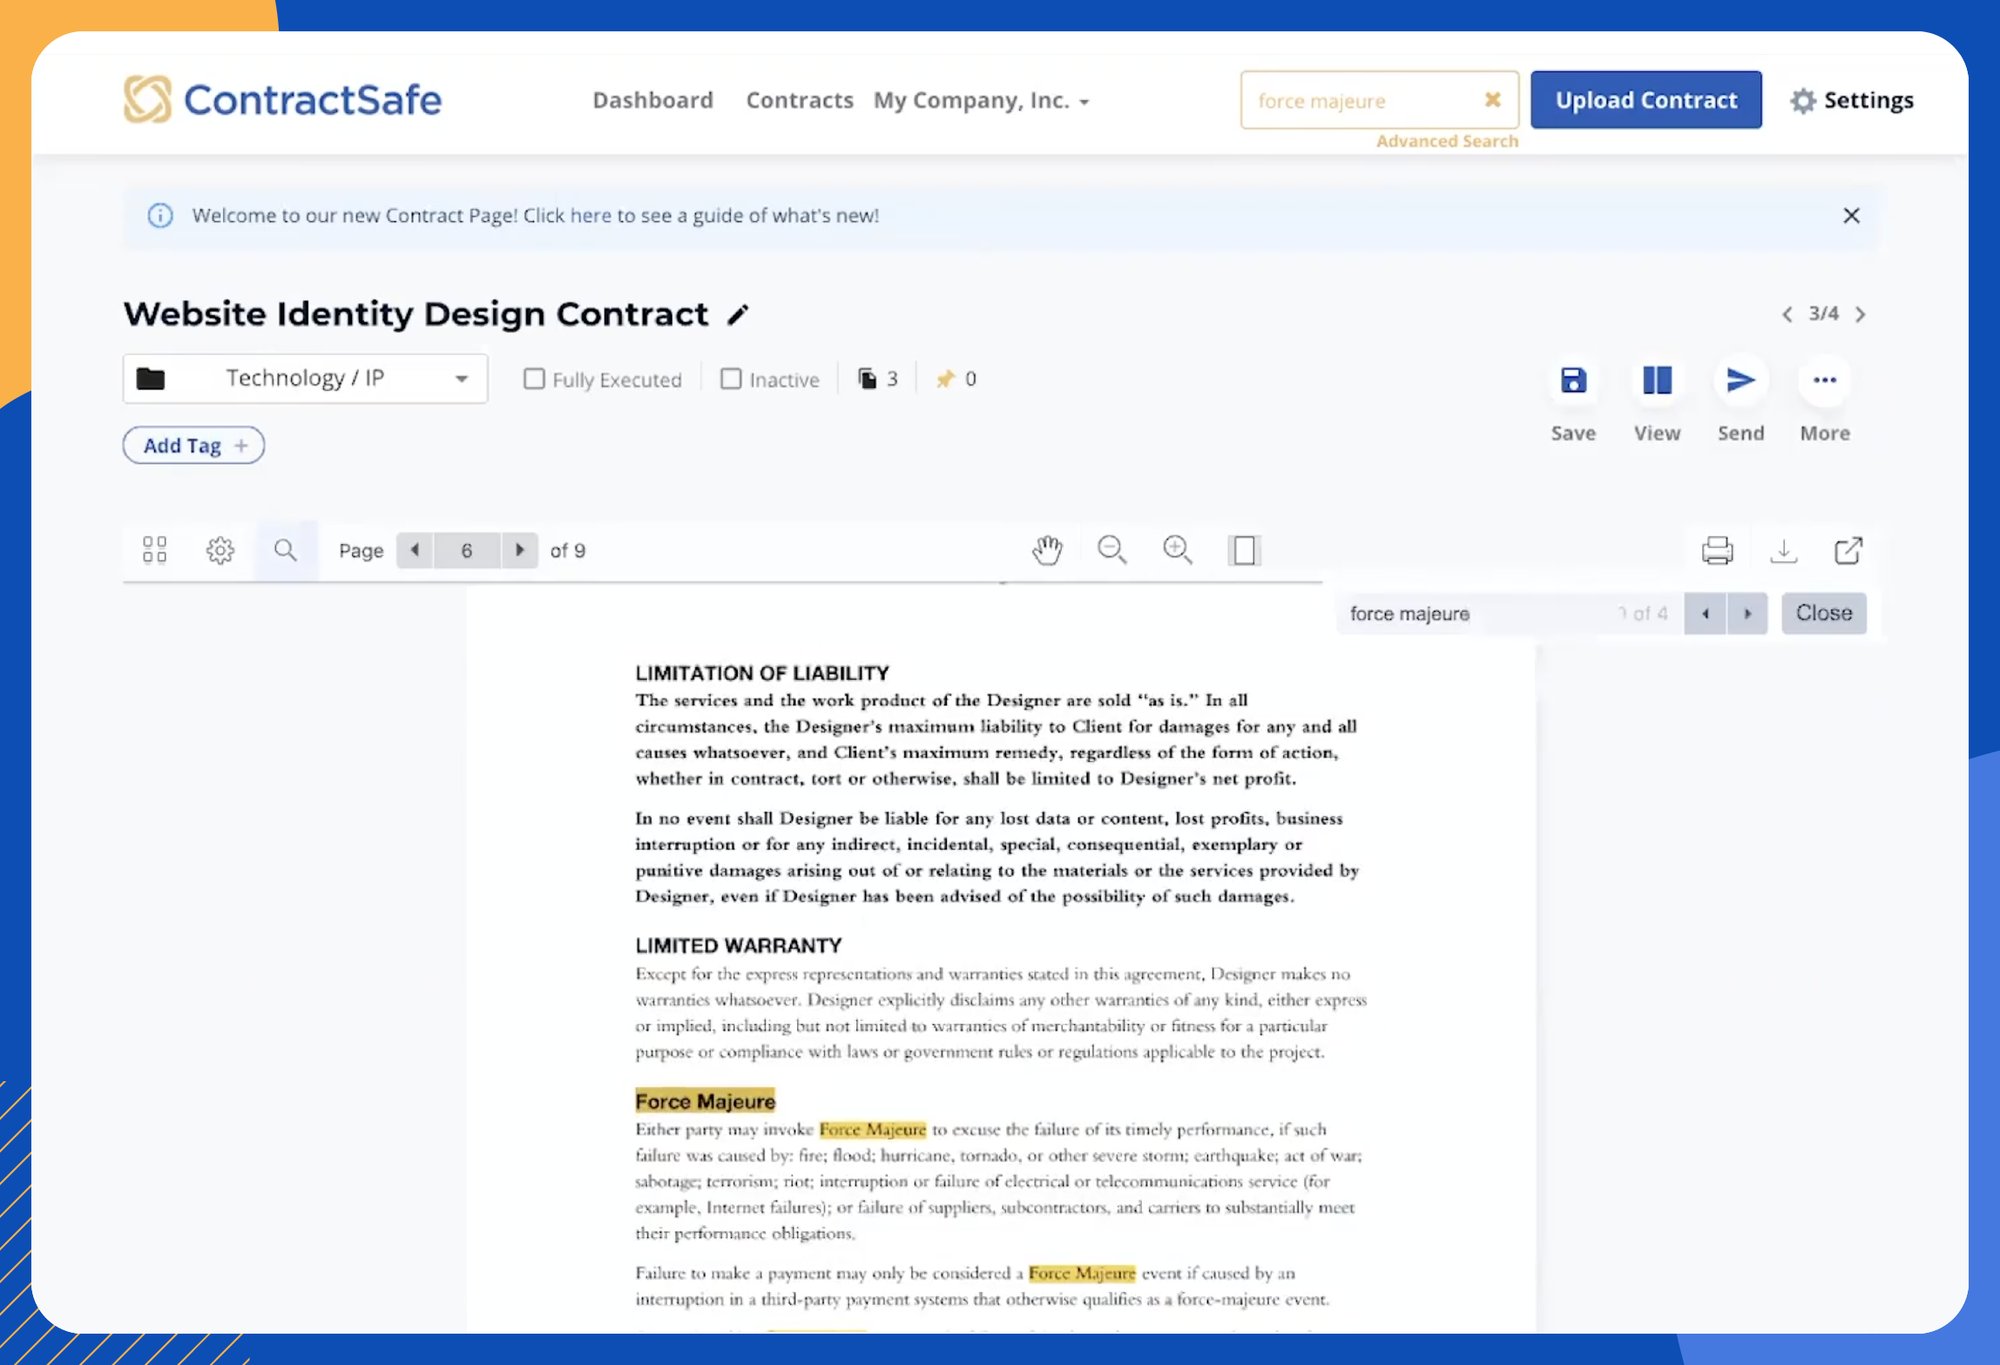 contractsafe-search-features